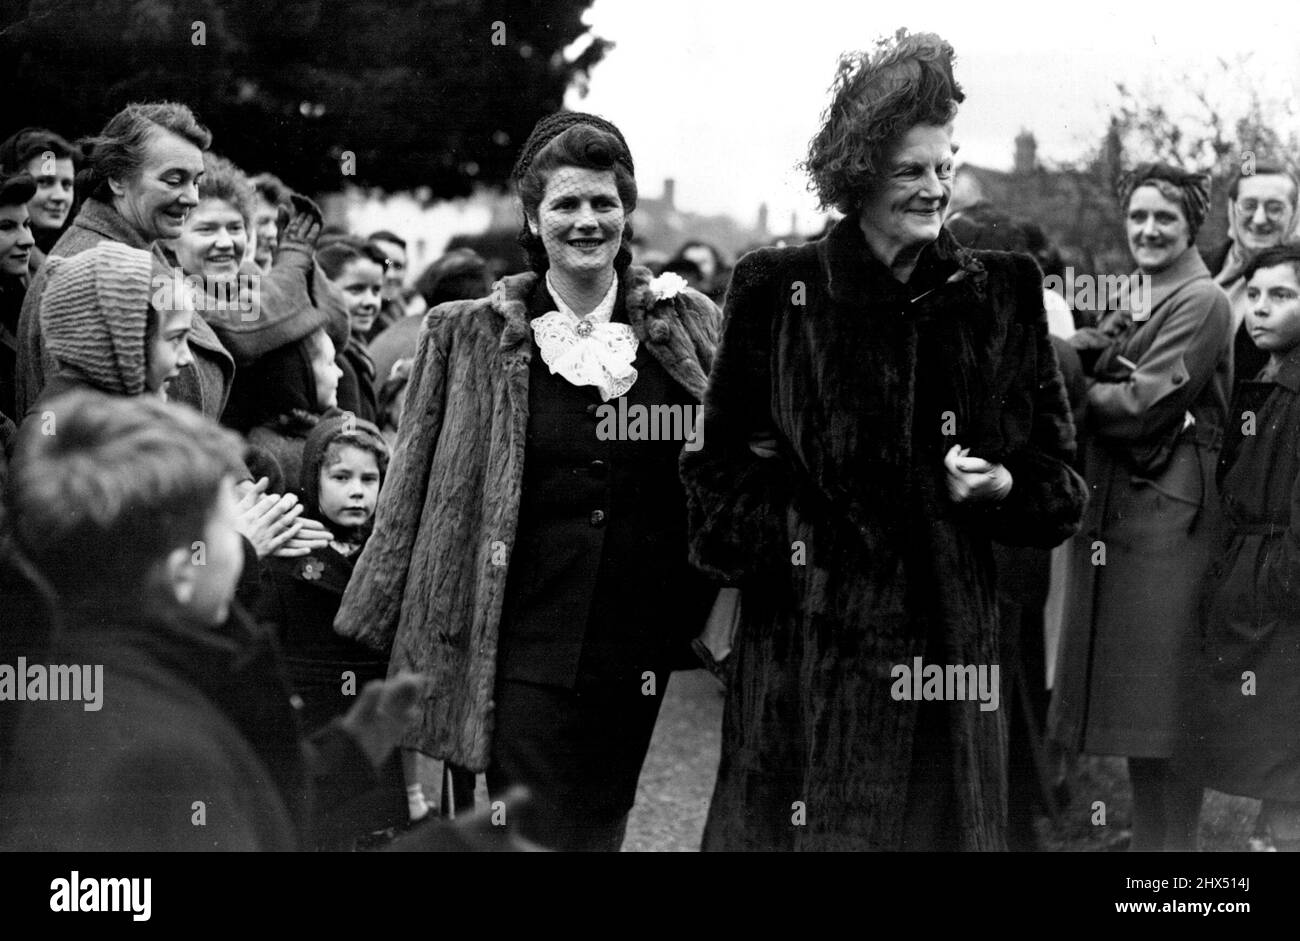 Lord Woolton's Son WedsMiss Mary Churchill, whose engagement to Capt. Christopher Soames was announced yesterday, gets a big hand from sight-seers as she arrives with her mother for the wedding at Beaconsfield to-day (Saturday). At the church of St. Mary and all saints, Beaconsfield, Bucksm this afternoon (Saturday), the Hon. Roger David Marquis, son and heir of Lord Woolton, was married to the Hon. Lucia Lanson,Only daughter of Major General Lord Burnham, of Hll Barn, Beaconsfield. The Bridgeroom's father is a former Minister of food and minister of Reconstruction, and was recently appointed Stock Photo